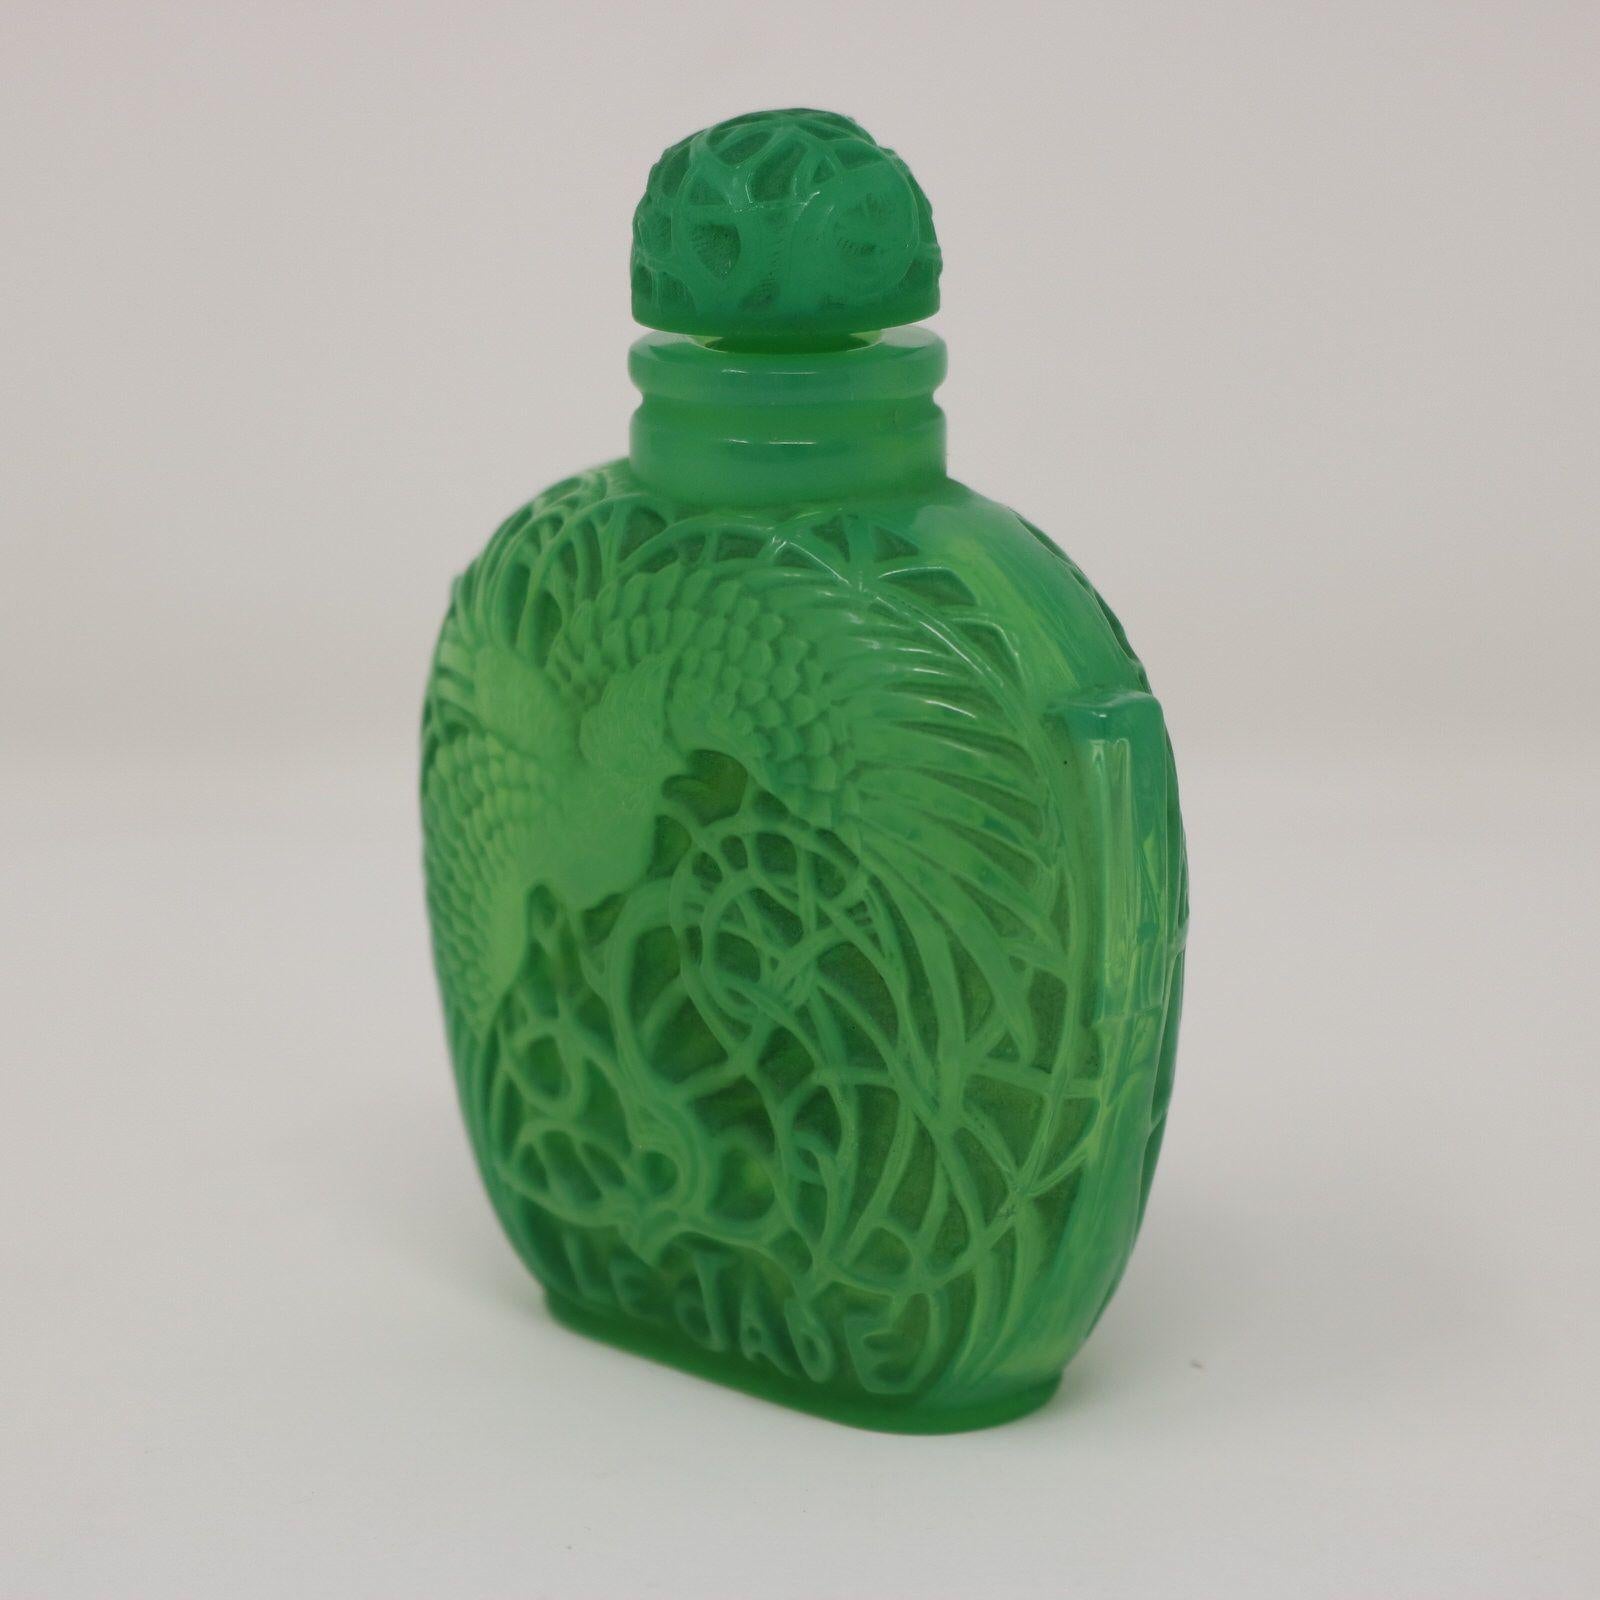 Rene Lalique green glass perfume bottle. Made for Roger & Gallet of Paris for 'Le Jade' perfume. Pattern features a tropical bird (cockatoo) amongst foliage. Moulded makers mark, 'R L FRANCE' to the underside. 'ROGER ET GALLE PARIS' to one side and